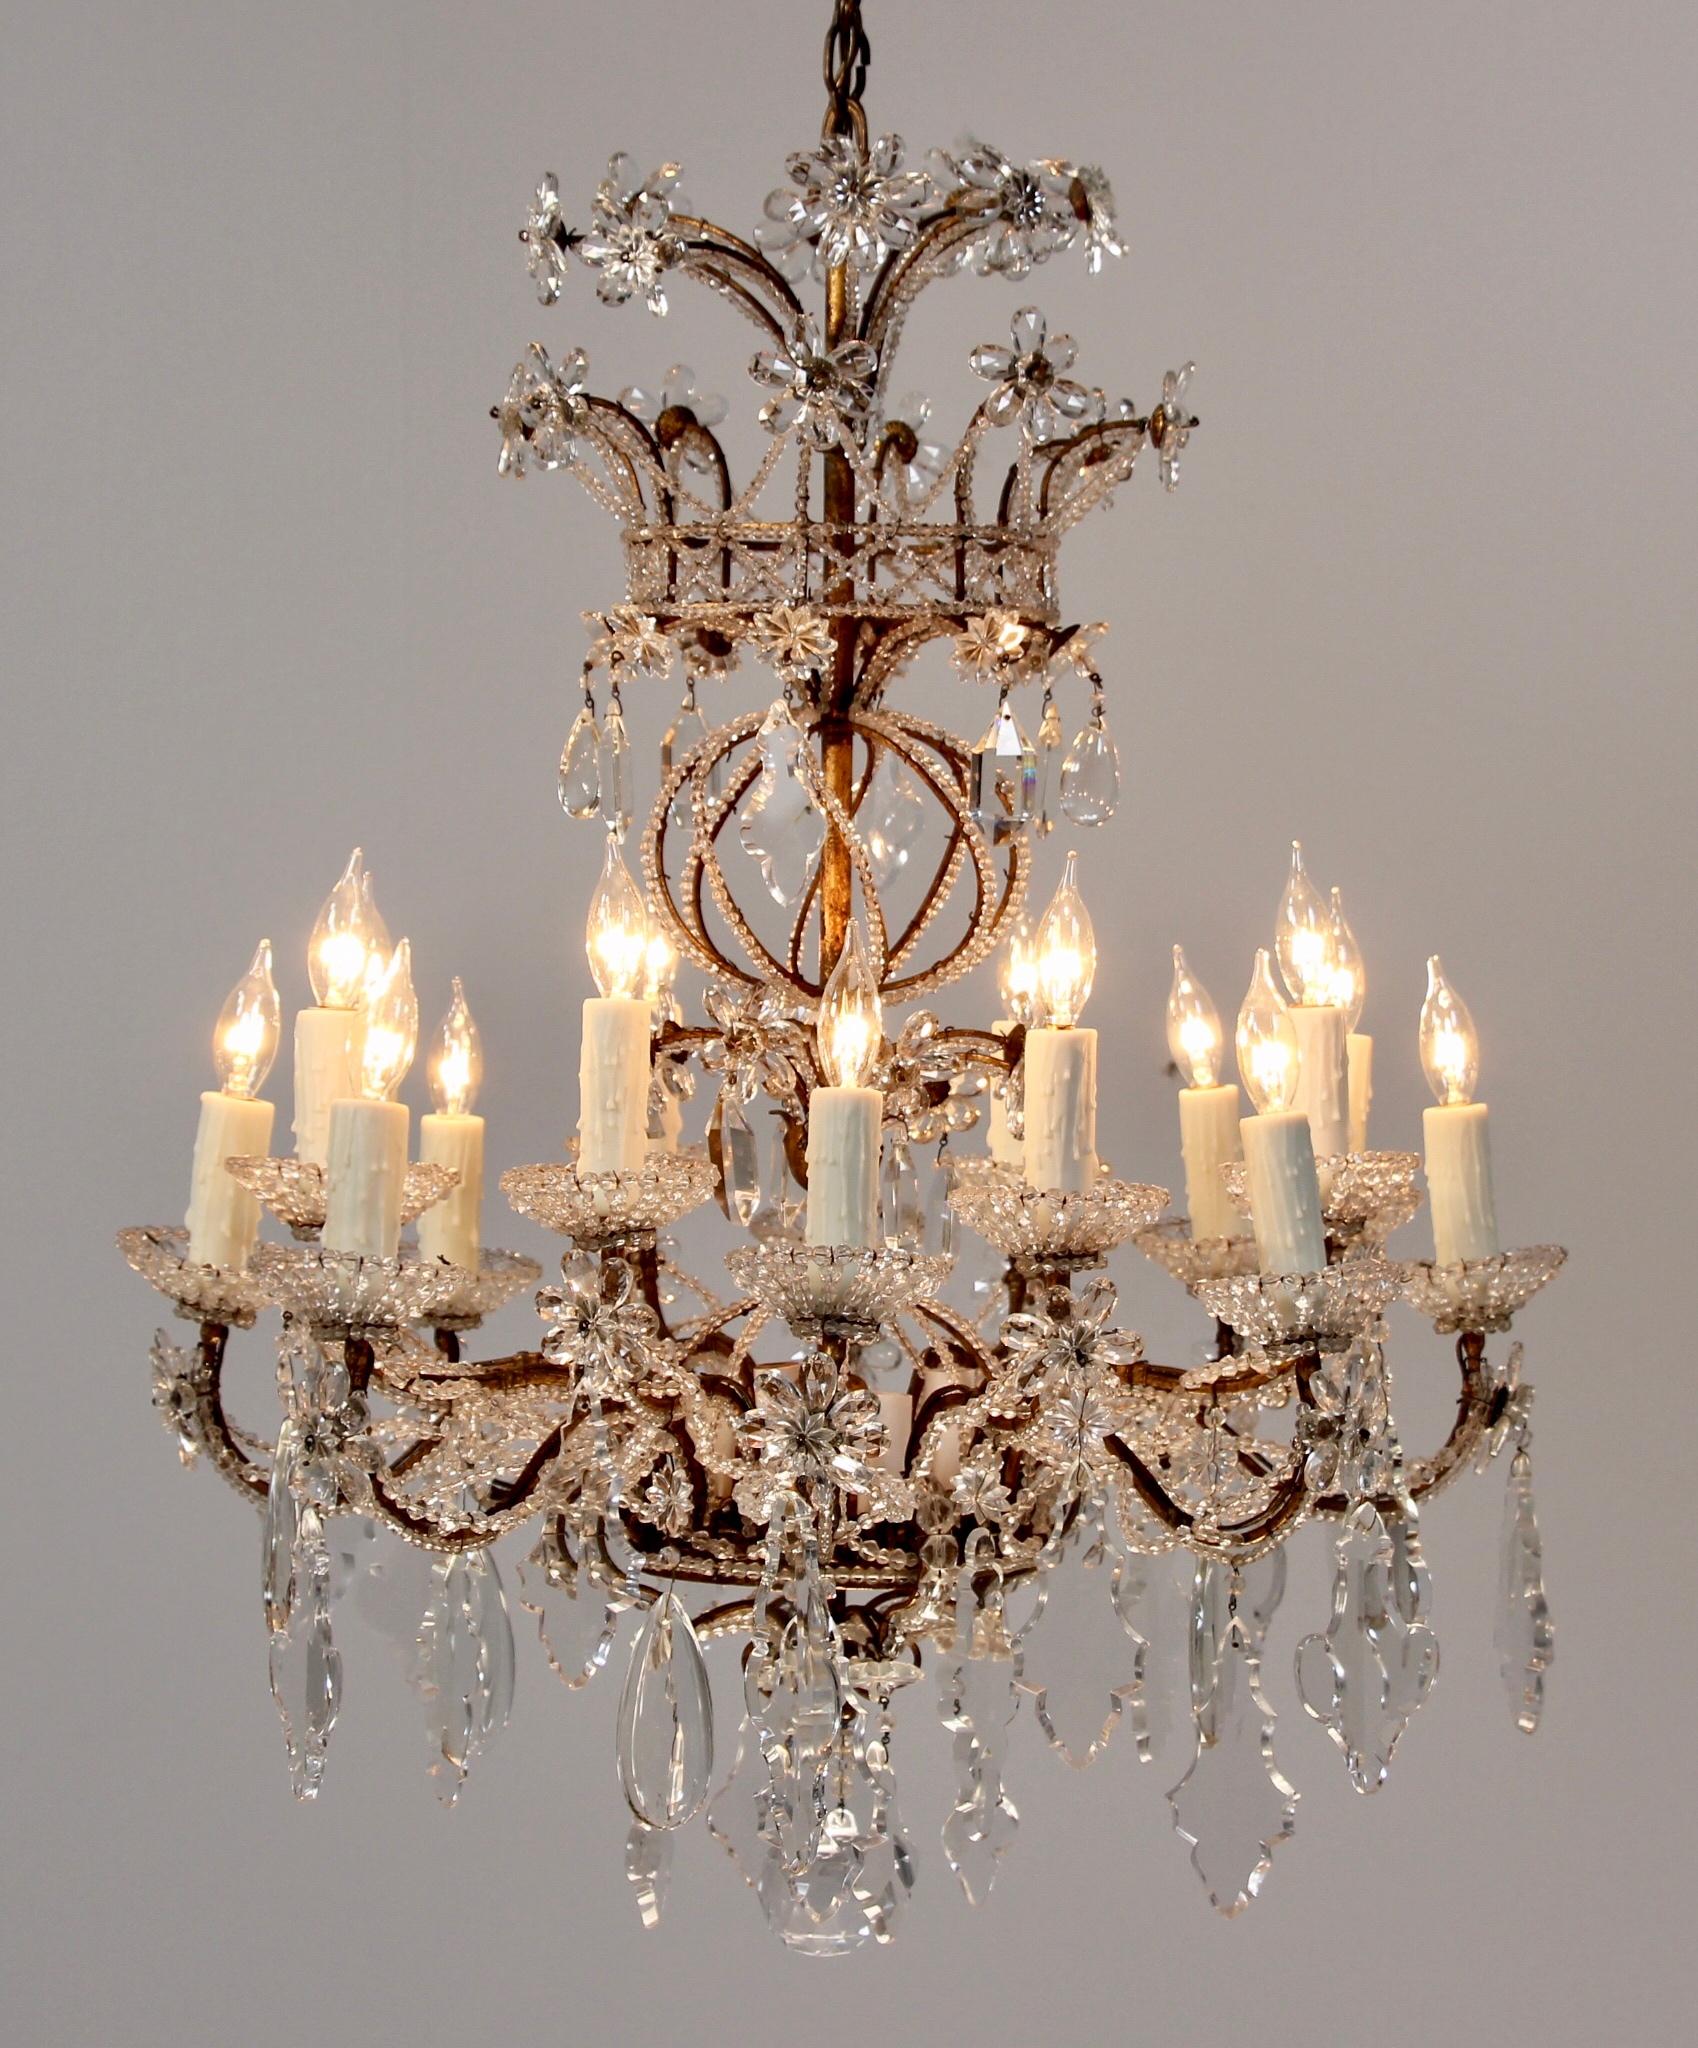 Spectacular, 1940s Venetian gilt iron and crystal beaded chandelier in the Louis XVI style. This rare beauty features an elaborate gilded iron frame which has been intricately beaded and decorated with an assortment of French pendalogues. Note the